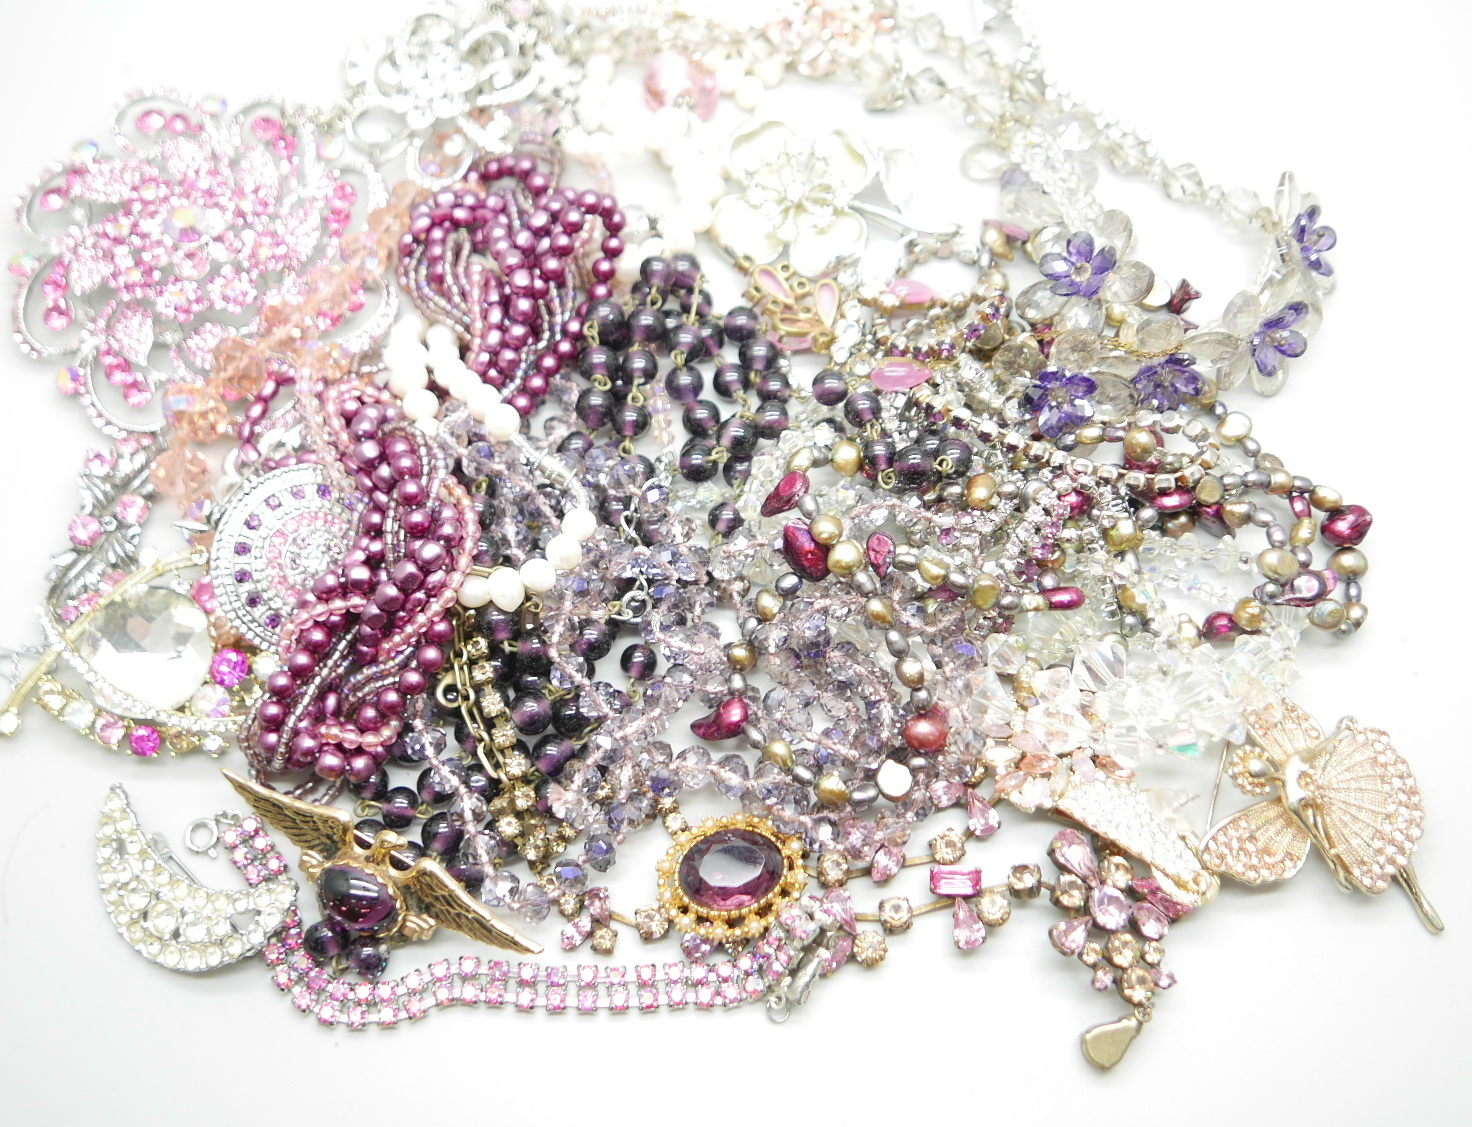 Vintage costume jewellery including coloured pearls and diamante